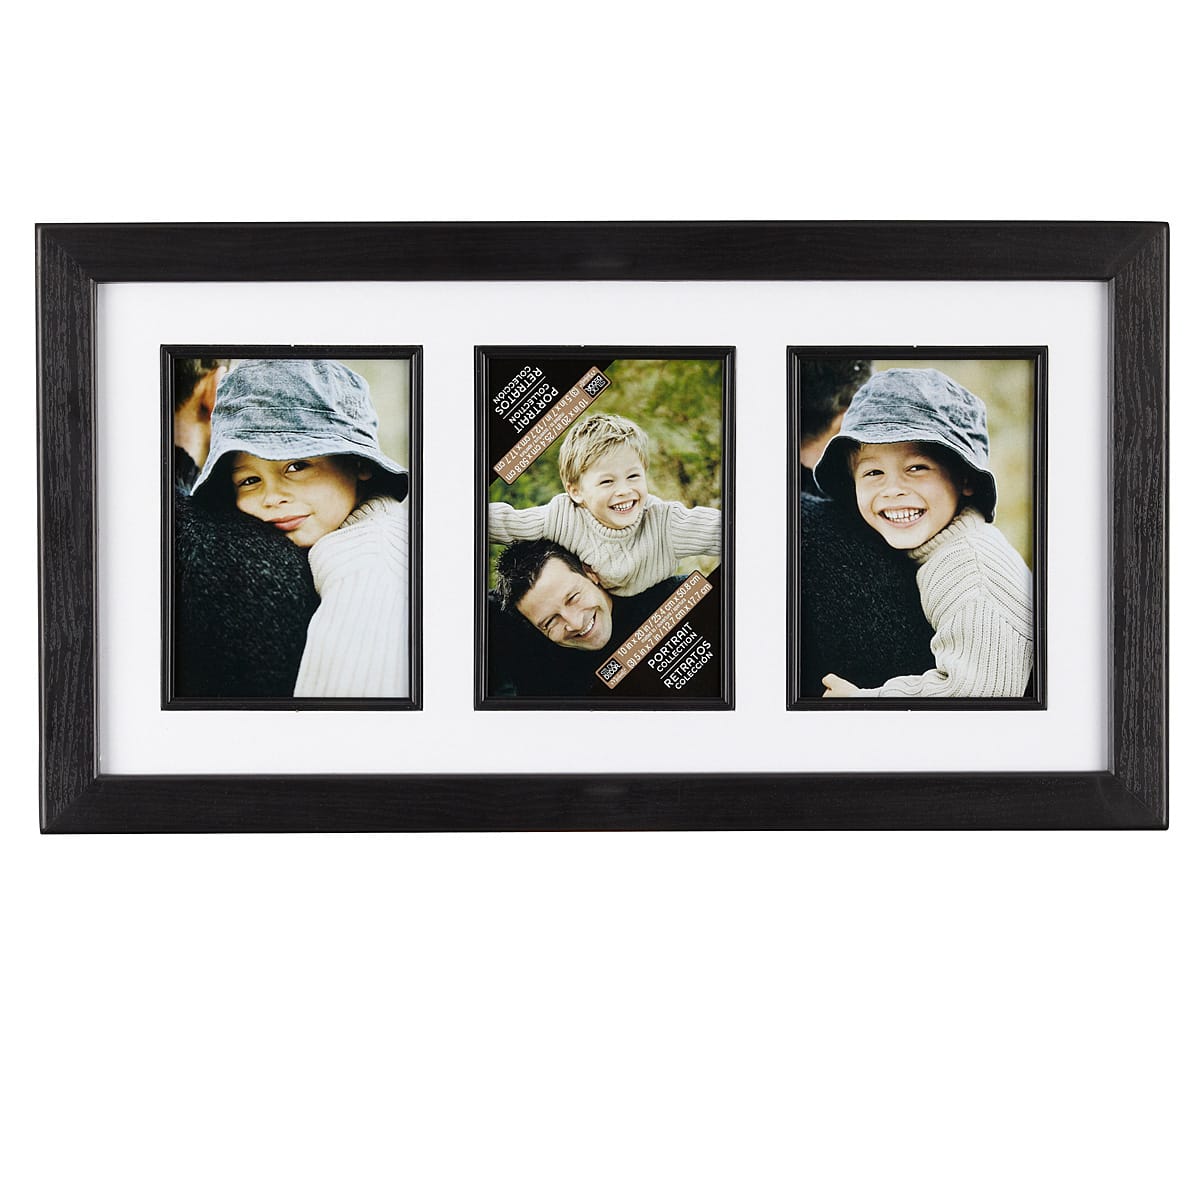 Details about   2010 Bacardi 3.5" x 2.5" Picture Frame Silver Winter Salud From Our Family 